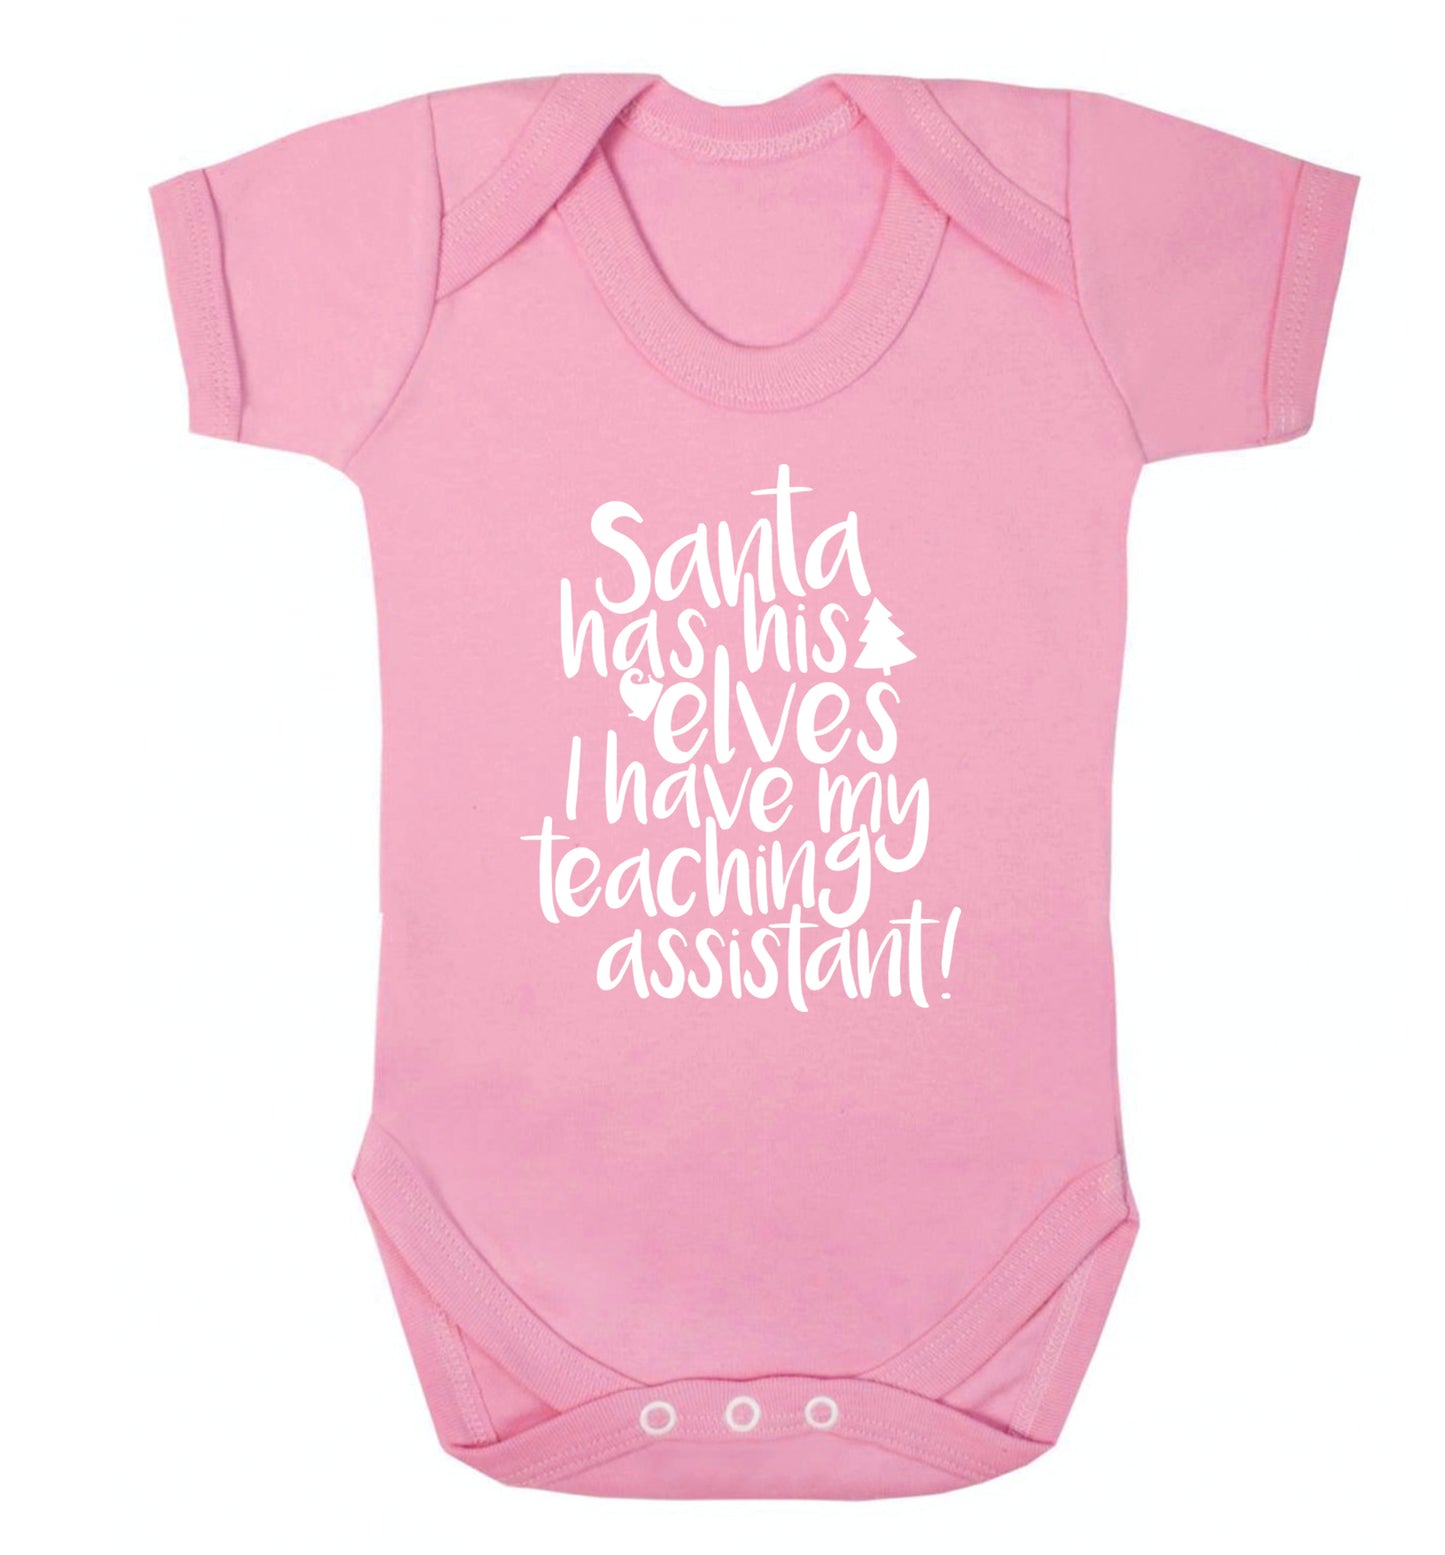 Santa has his elves I have my teaching assistant Baby Vest pale pink 18-24 months